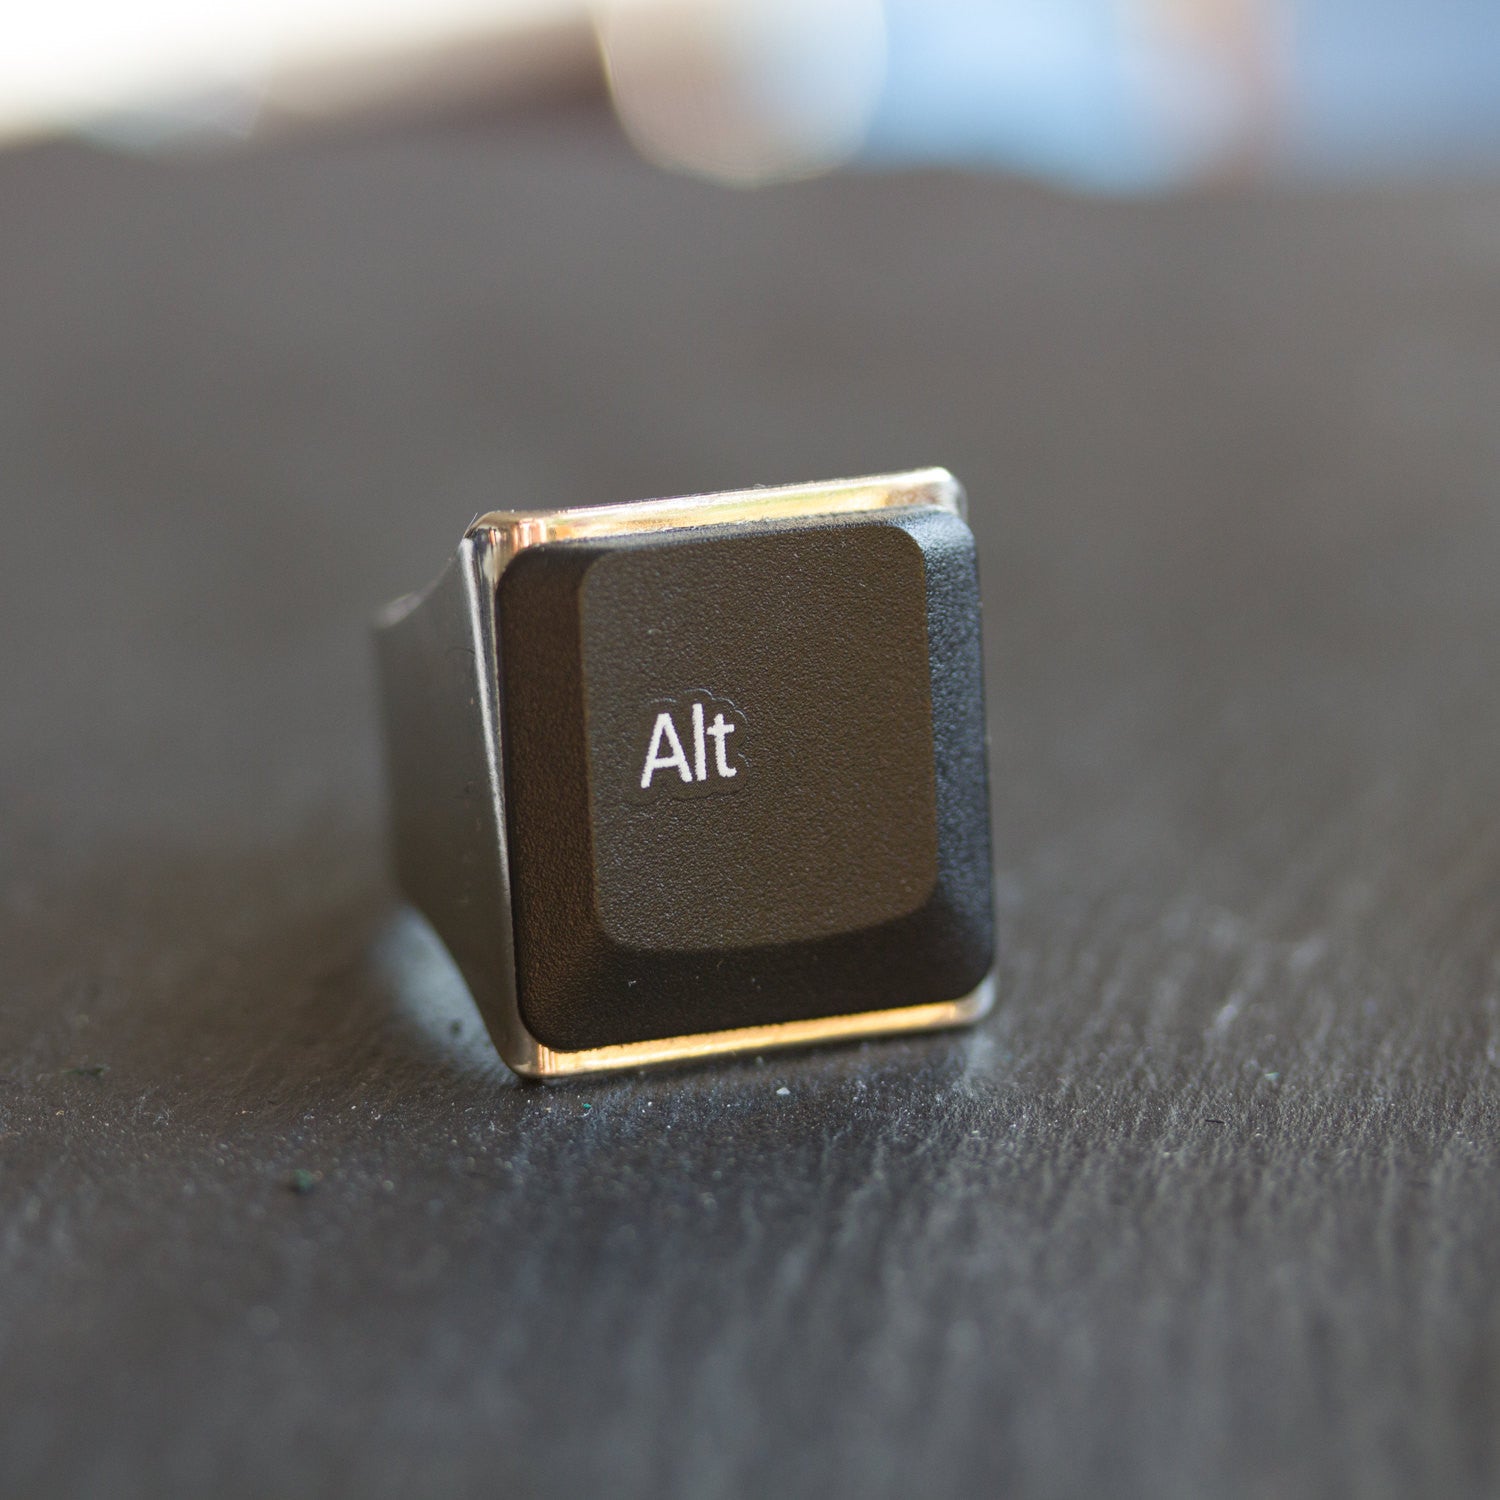 Alt ring, unique men's ring with alt keyboard button